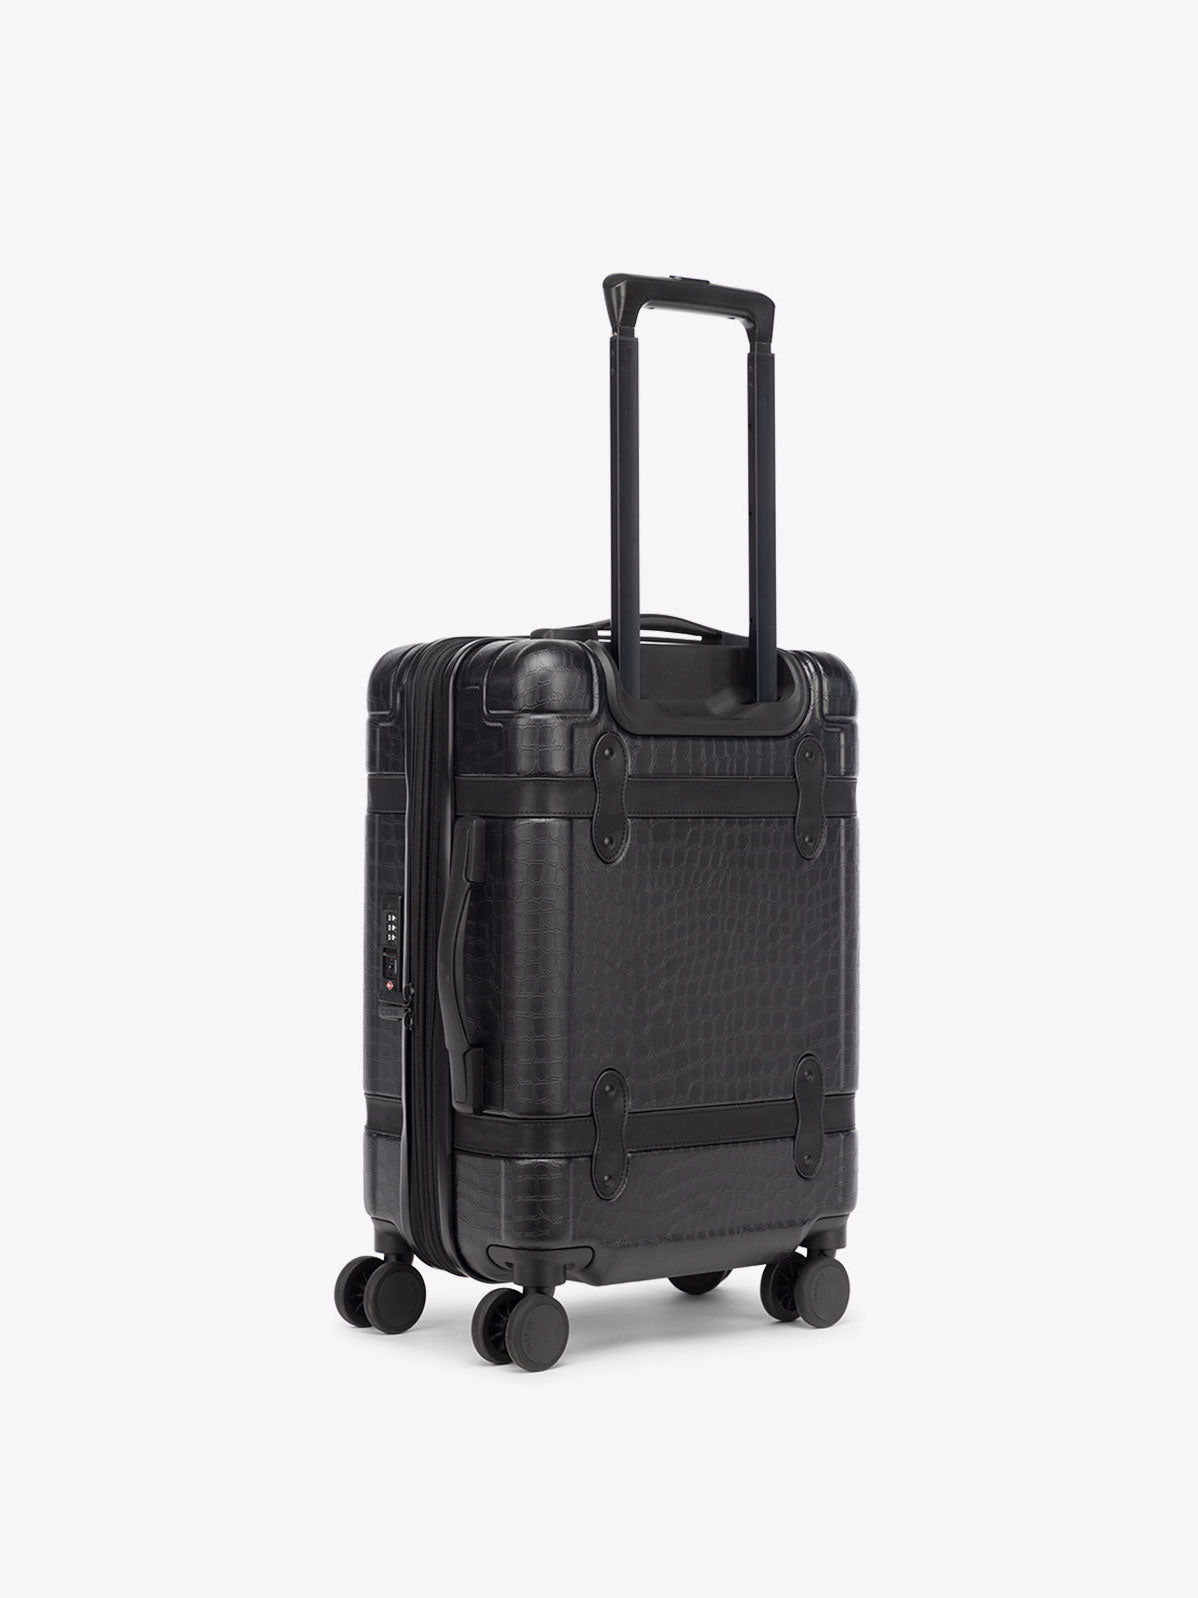 black hard shell CALPAK TRNK suitcase with four 360 wheels in vintage trunk style carry-on luggage